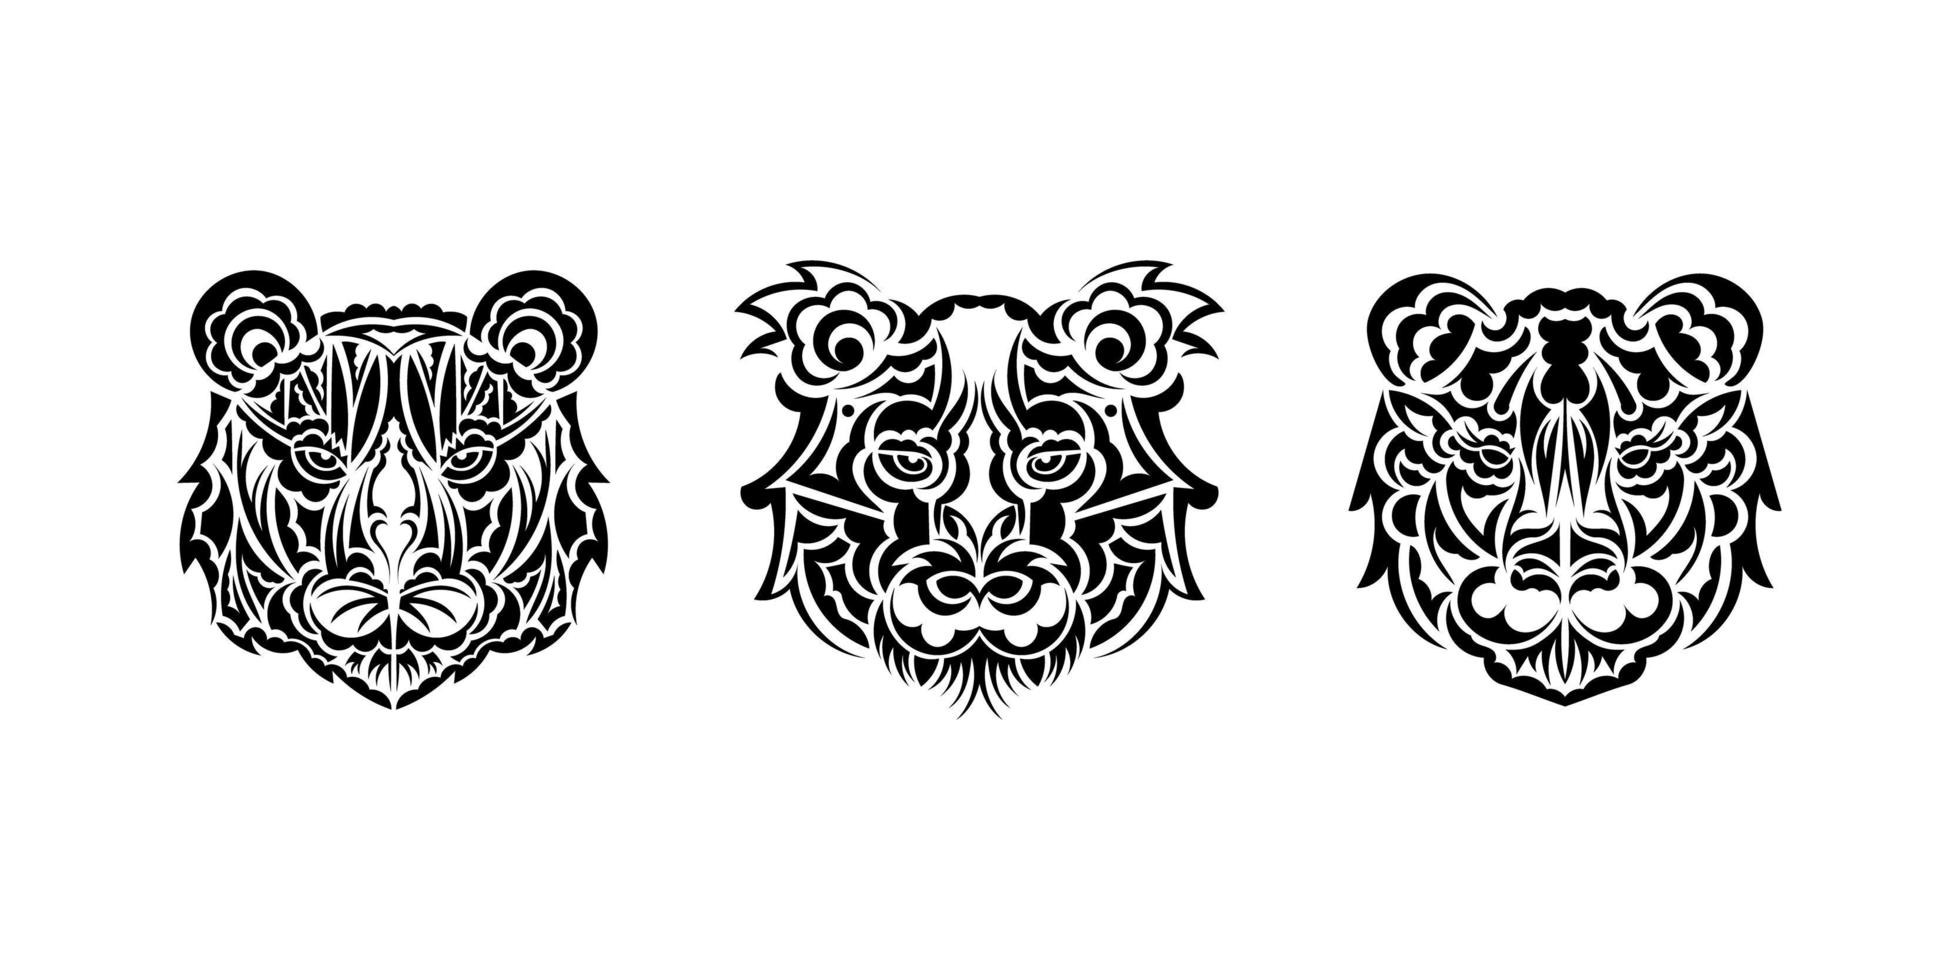 Tiger face tattoo set in Maori style. Boho tiger face. Good for prints, apparel and textiles. Vector illustration.